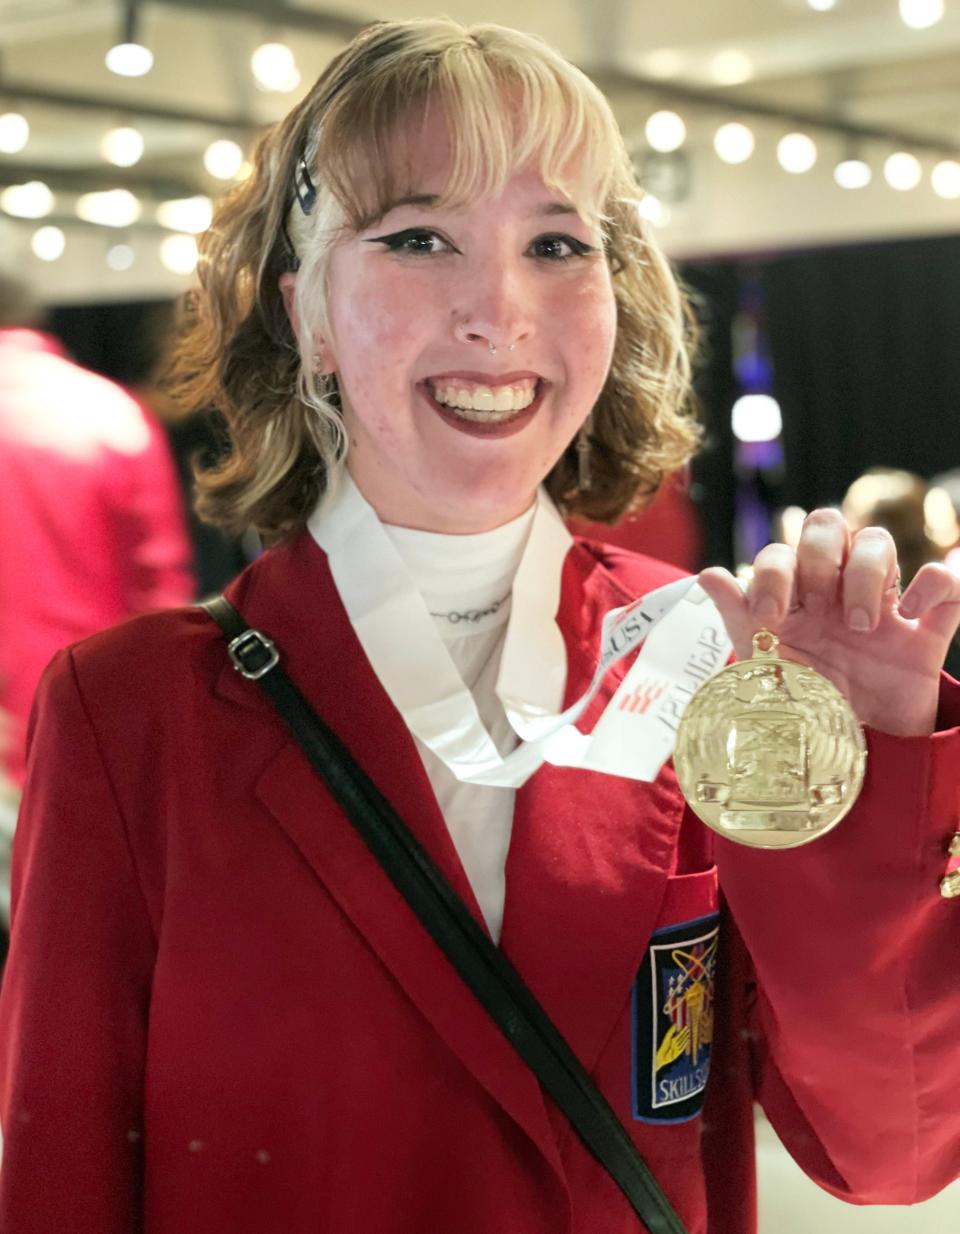 Graduating B-P senior Tess Brunelle took home the gold at the National Skills USA competition in June in Atlanta, Georgia.